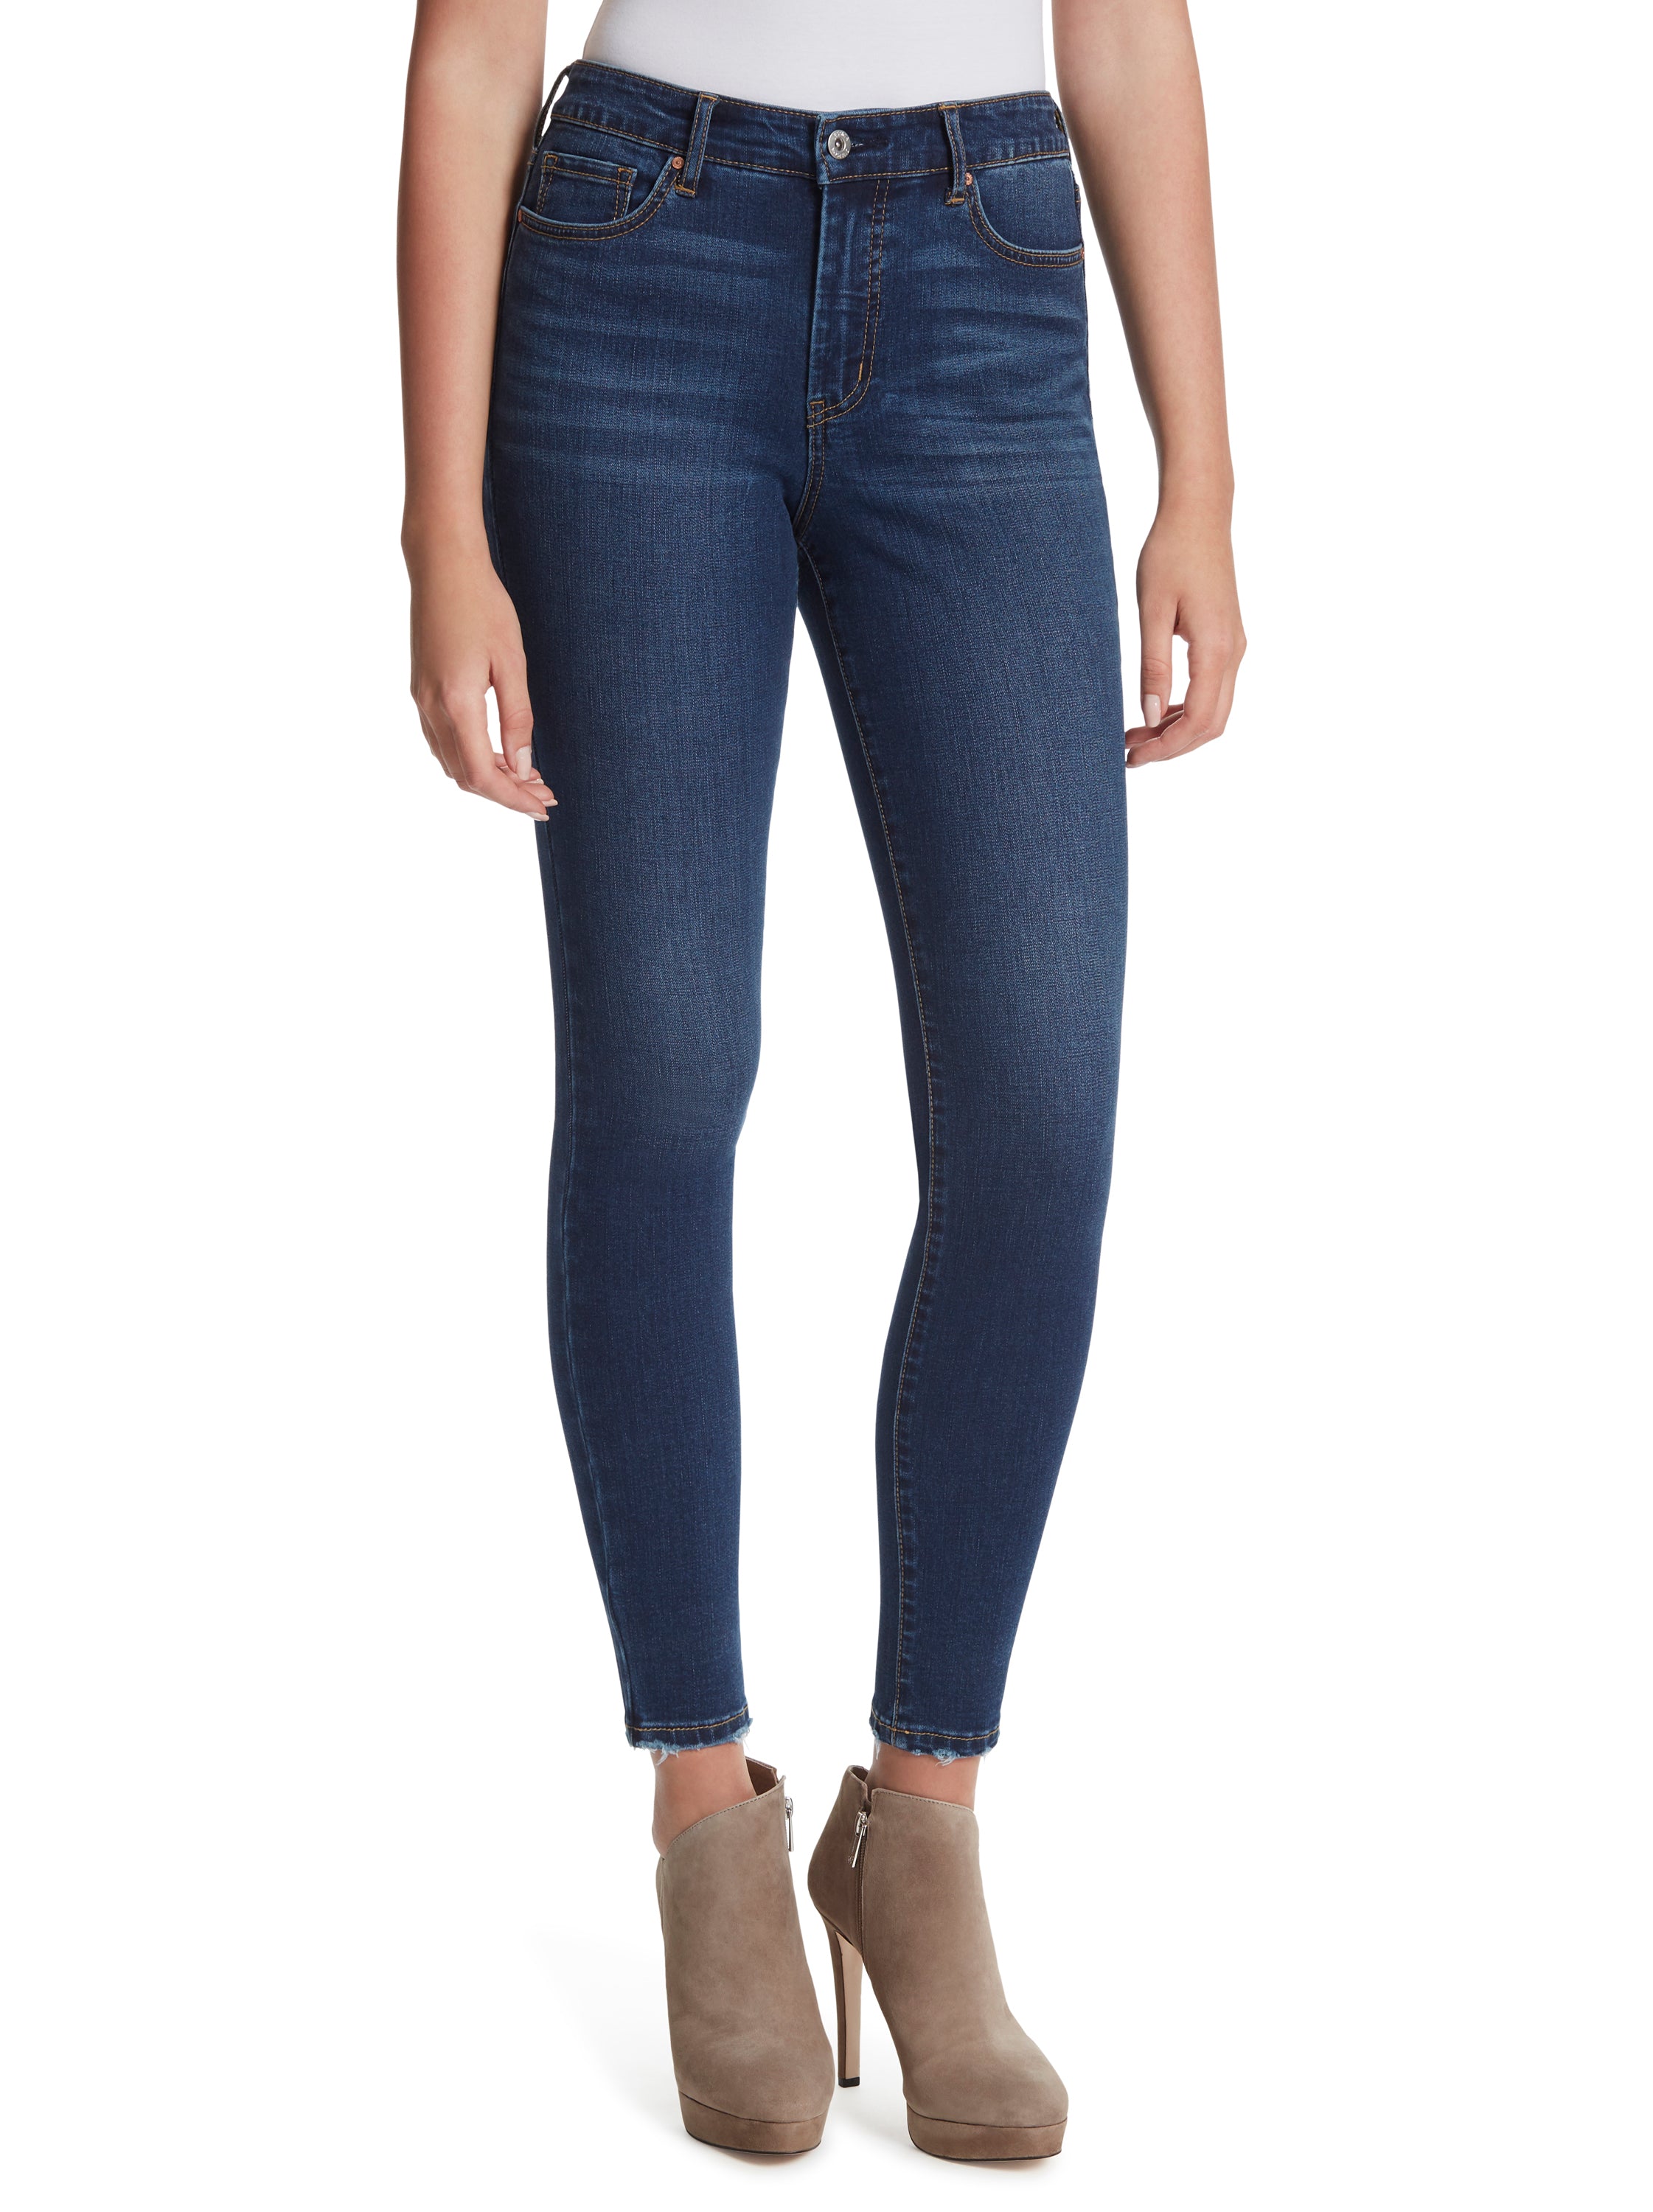 Jessica Simpson Rae High Waisted Ankle Leggings In China Blue At